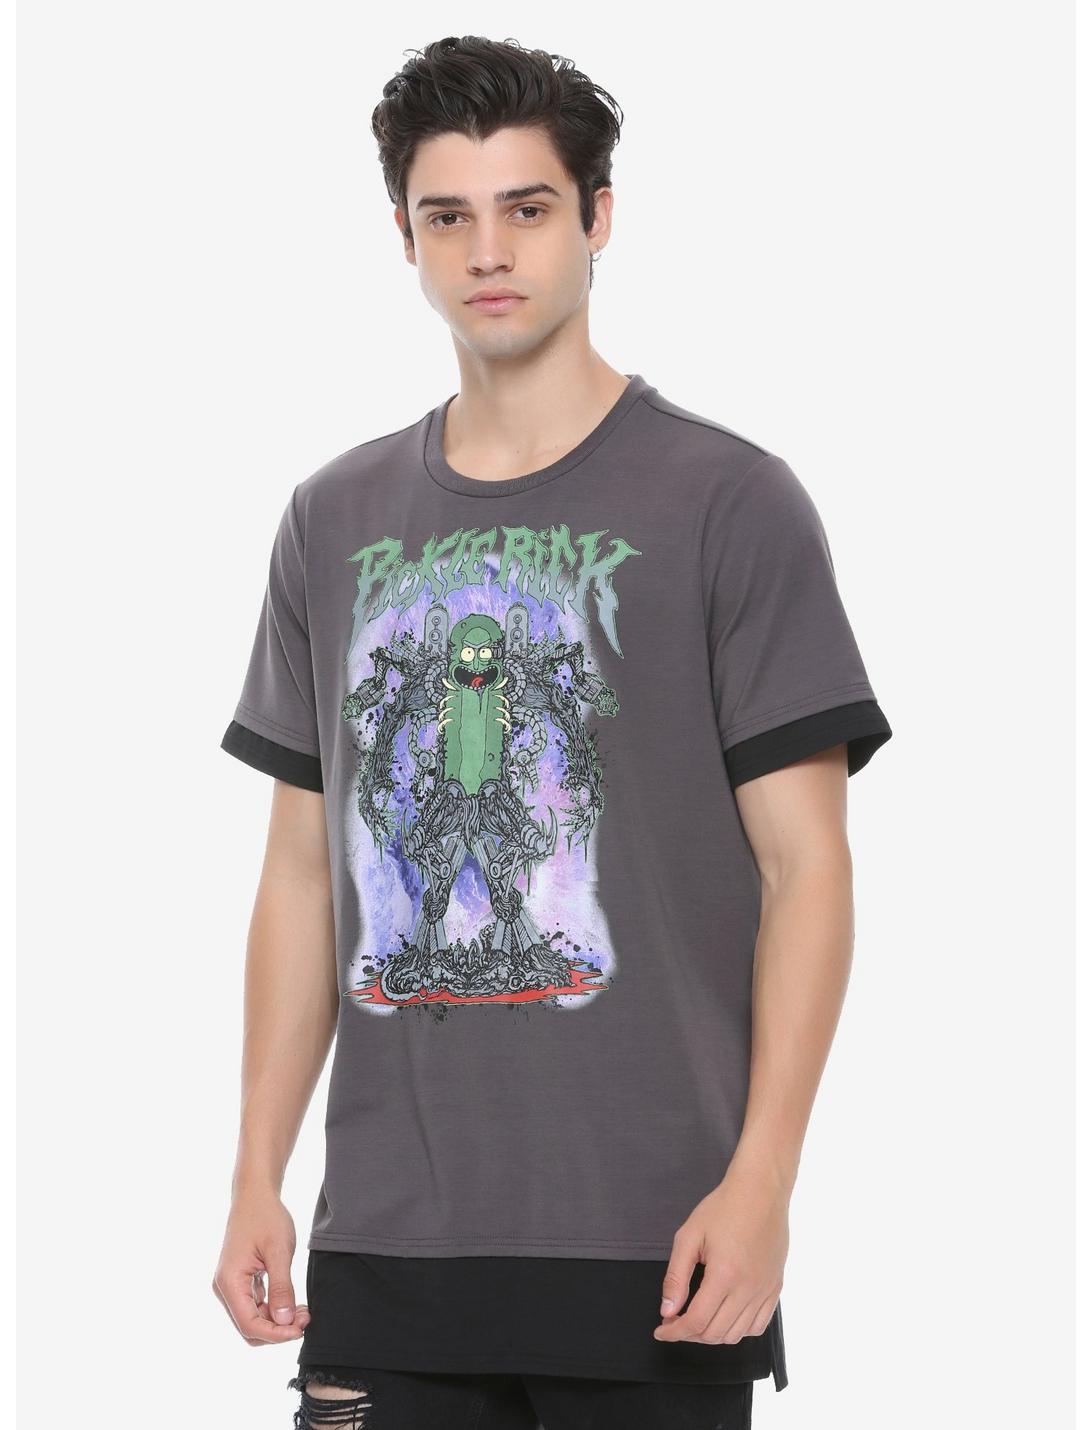 Rick And Morty Pickle Rick Layer T-Shirt Hot Topic Exclusive, GREY, hi-res